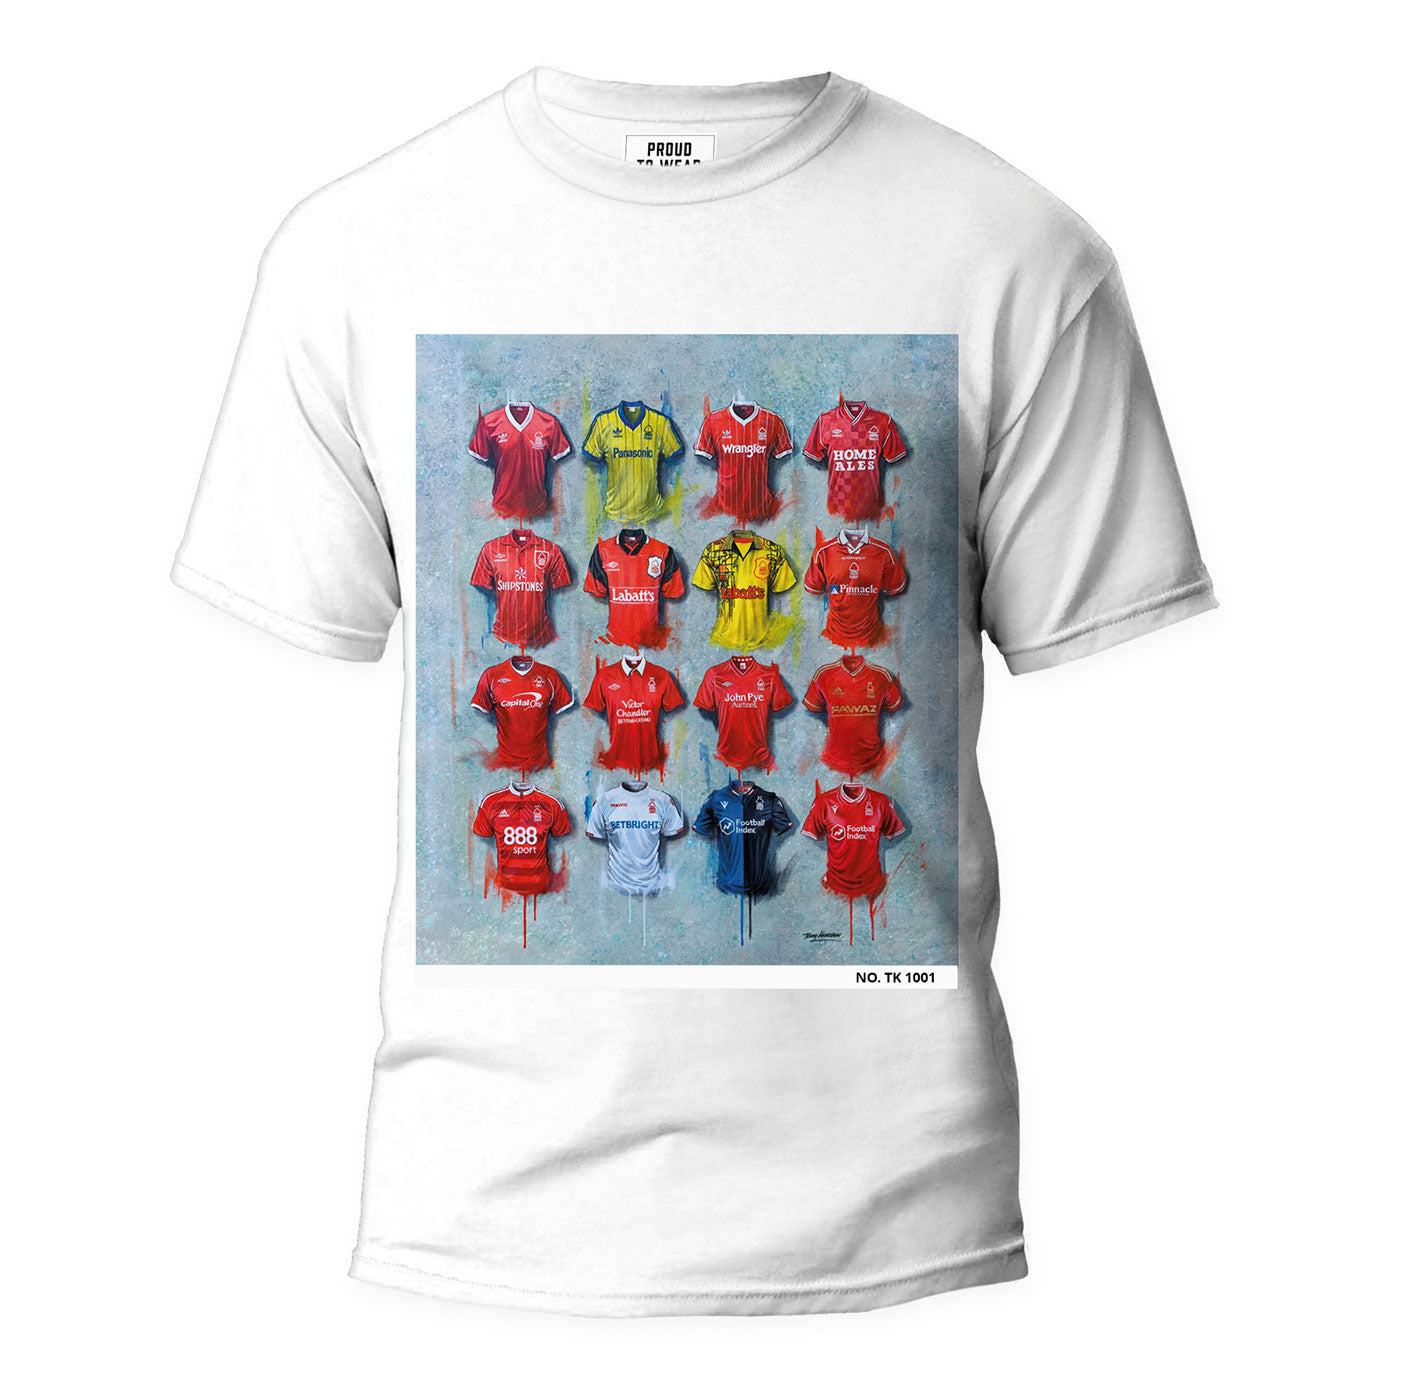 These Nottingham Forest T Shirts from Terry Kneeshaw showcase his unique artwork for that team. These one-off, individually numbered T Shirts are available in sizes xxs - xxxl and come in a choice of Black T Shirt or White T Shirt. The T Shirts feature the Nottingham Forest team logo, and are perfect for fans who want to show off their support for the team in style.